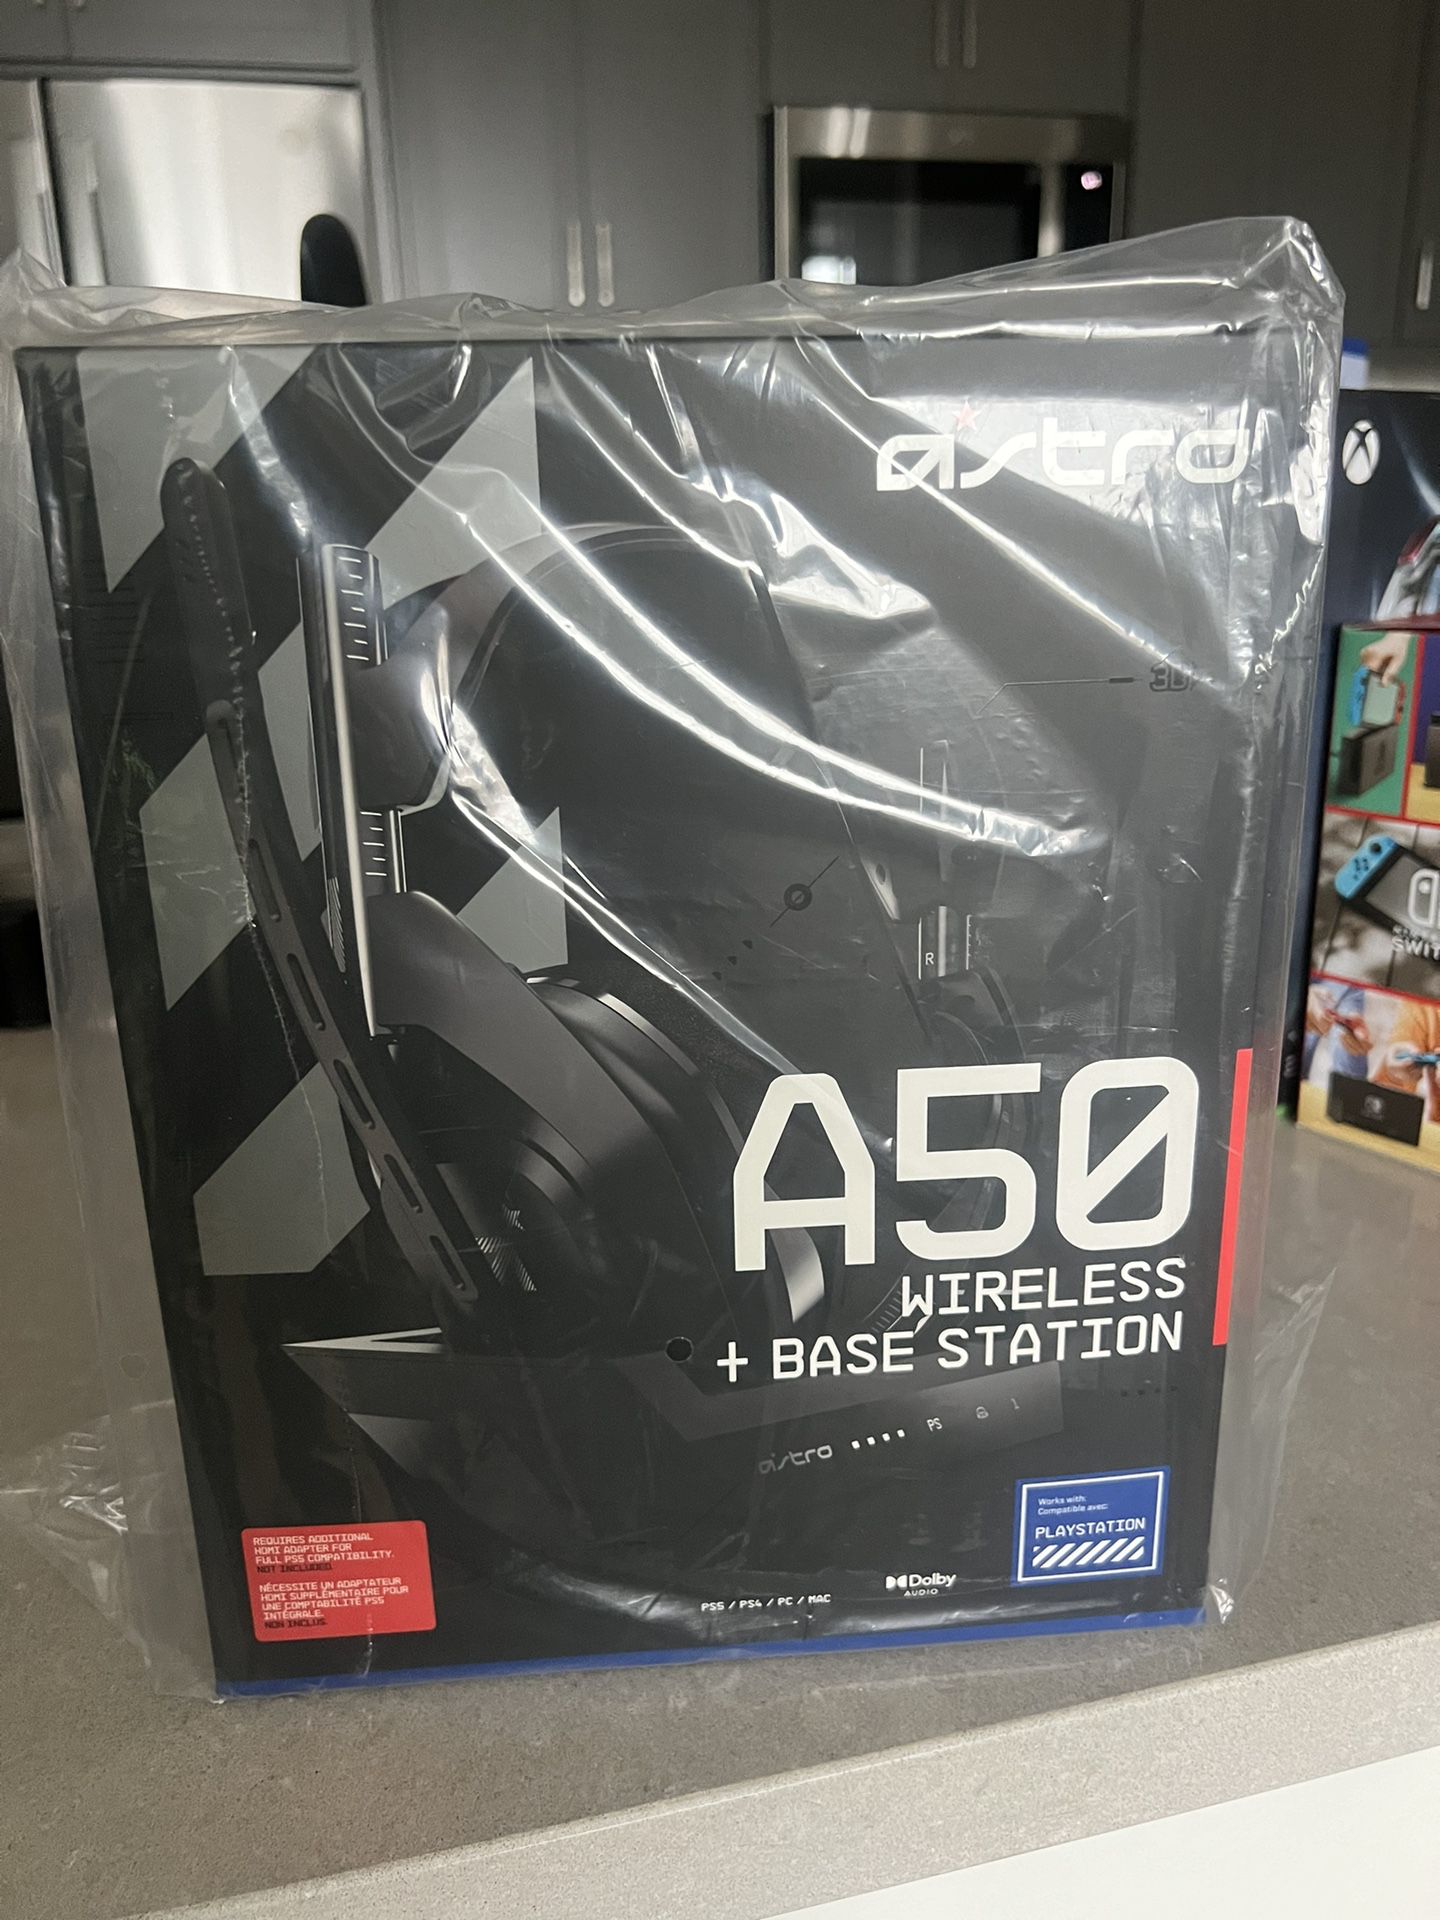 Astro A50 Wireless + Base Station 